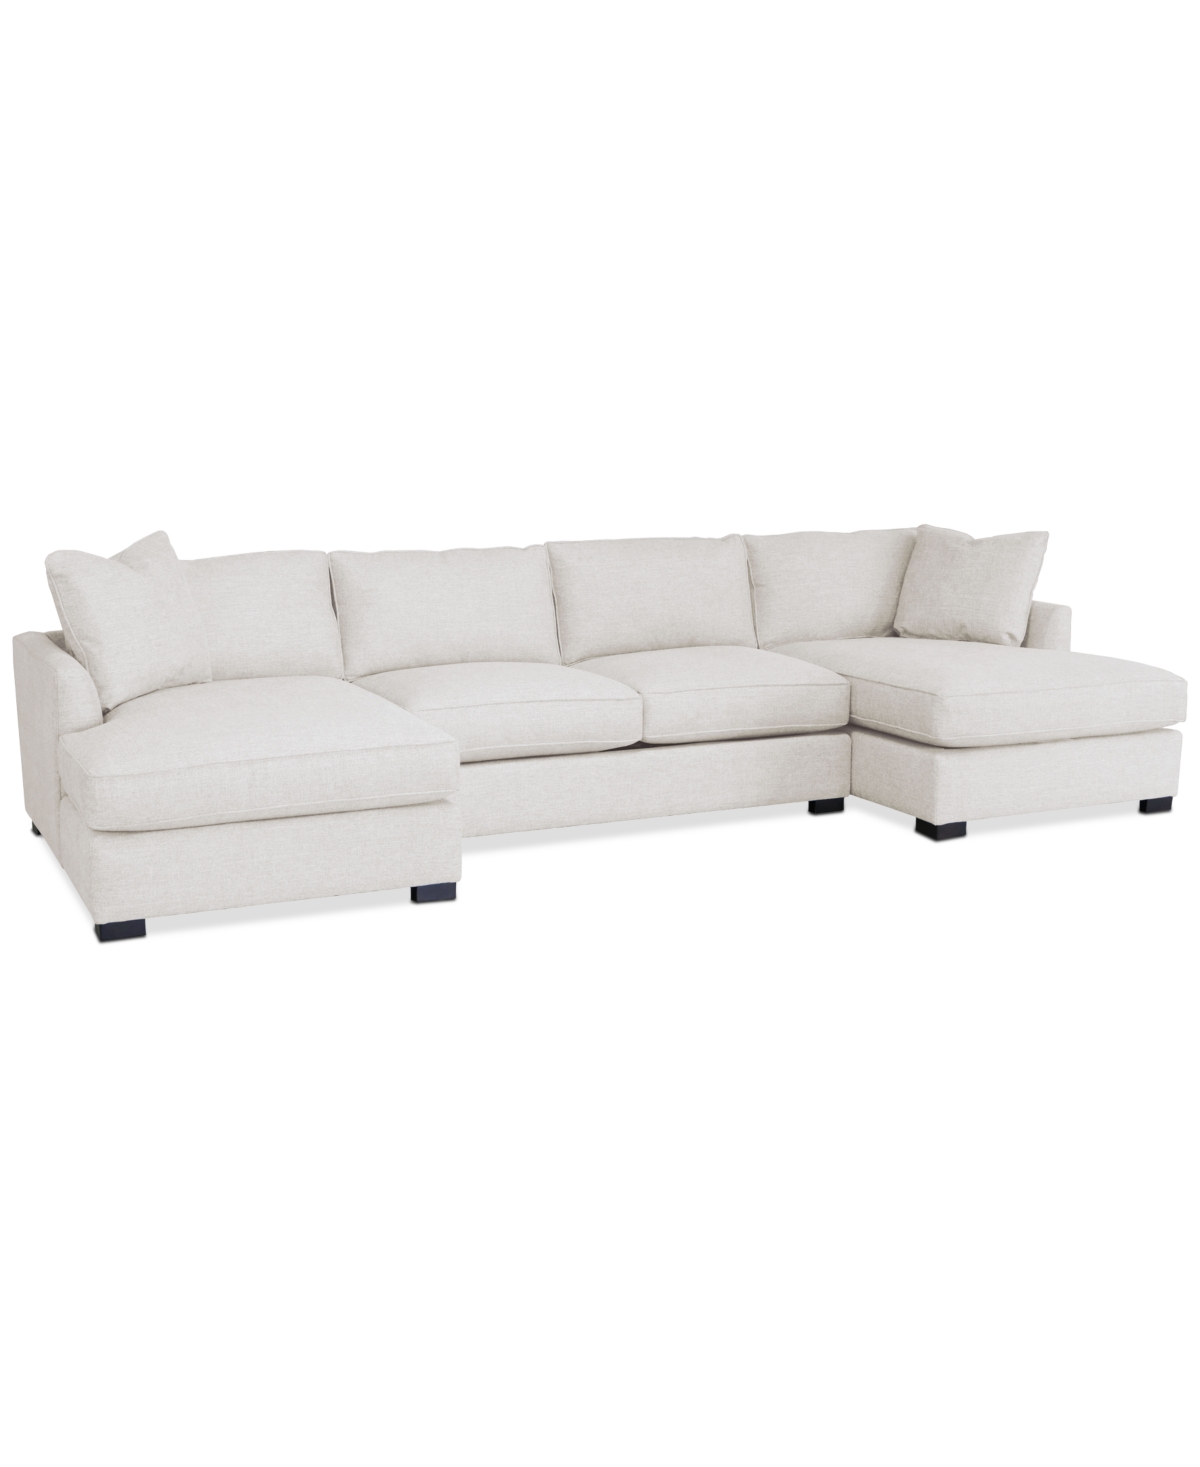 Furniture Nightford 146" 3-pc. Fabric Double Chaise Sectional, Created For Macy's In Dove